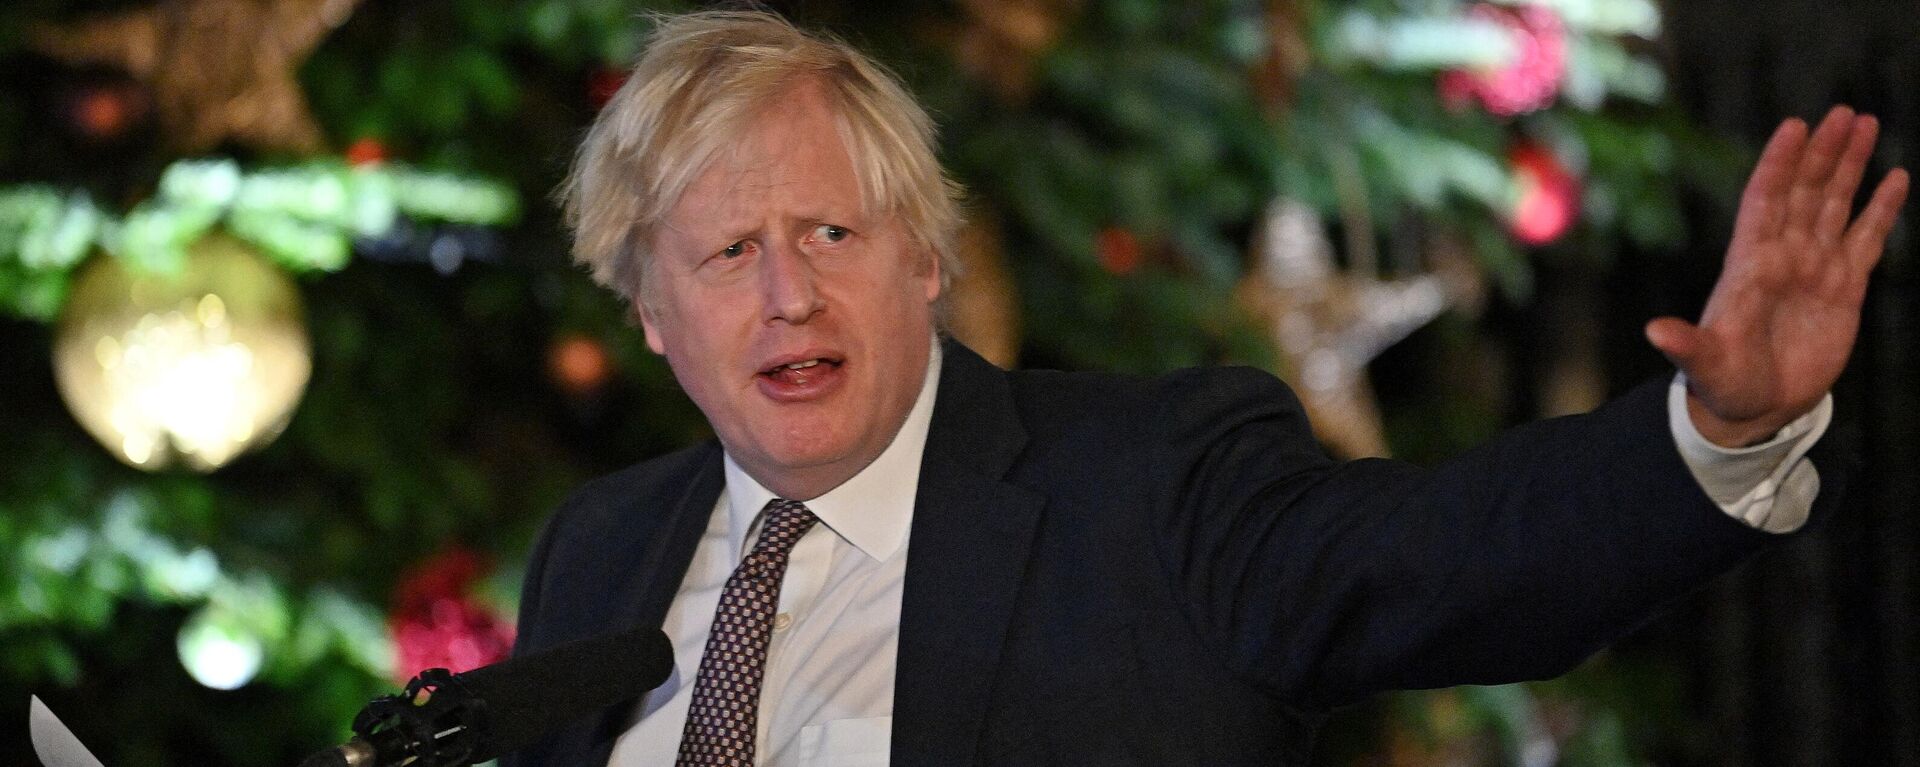 Britain's Prime Minister Boris Johnson makes a speech as he visits a UK Food and Drinks market set up in Downing Street, central London on November 30, 2021. (Photo by JUSTIN TALLIS / POOL / AFP) - Sputnik International, 1920, 04.12.2021